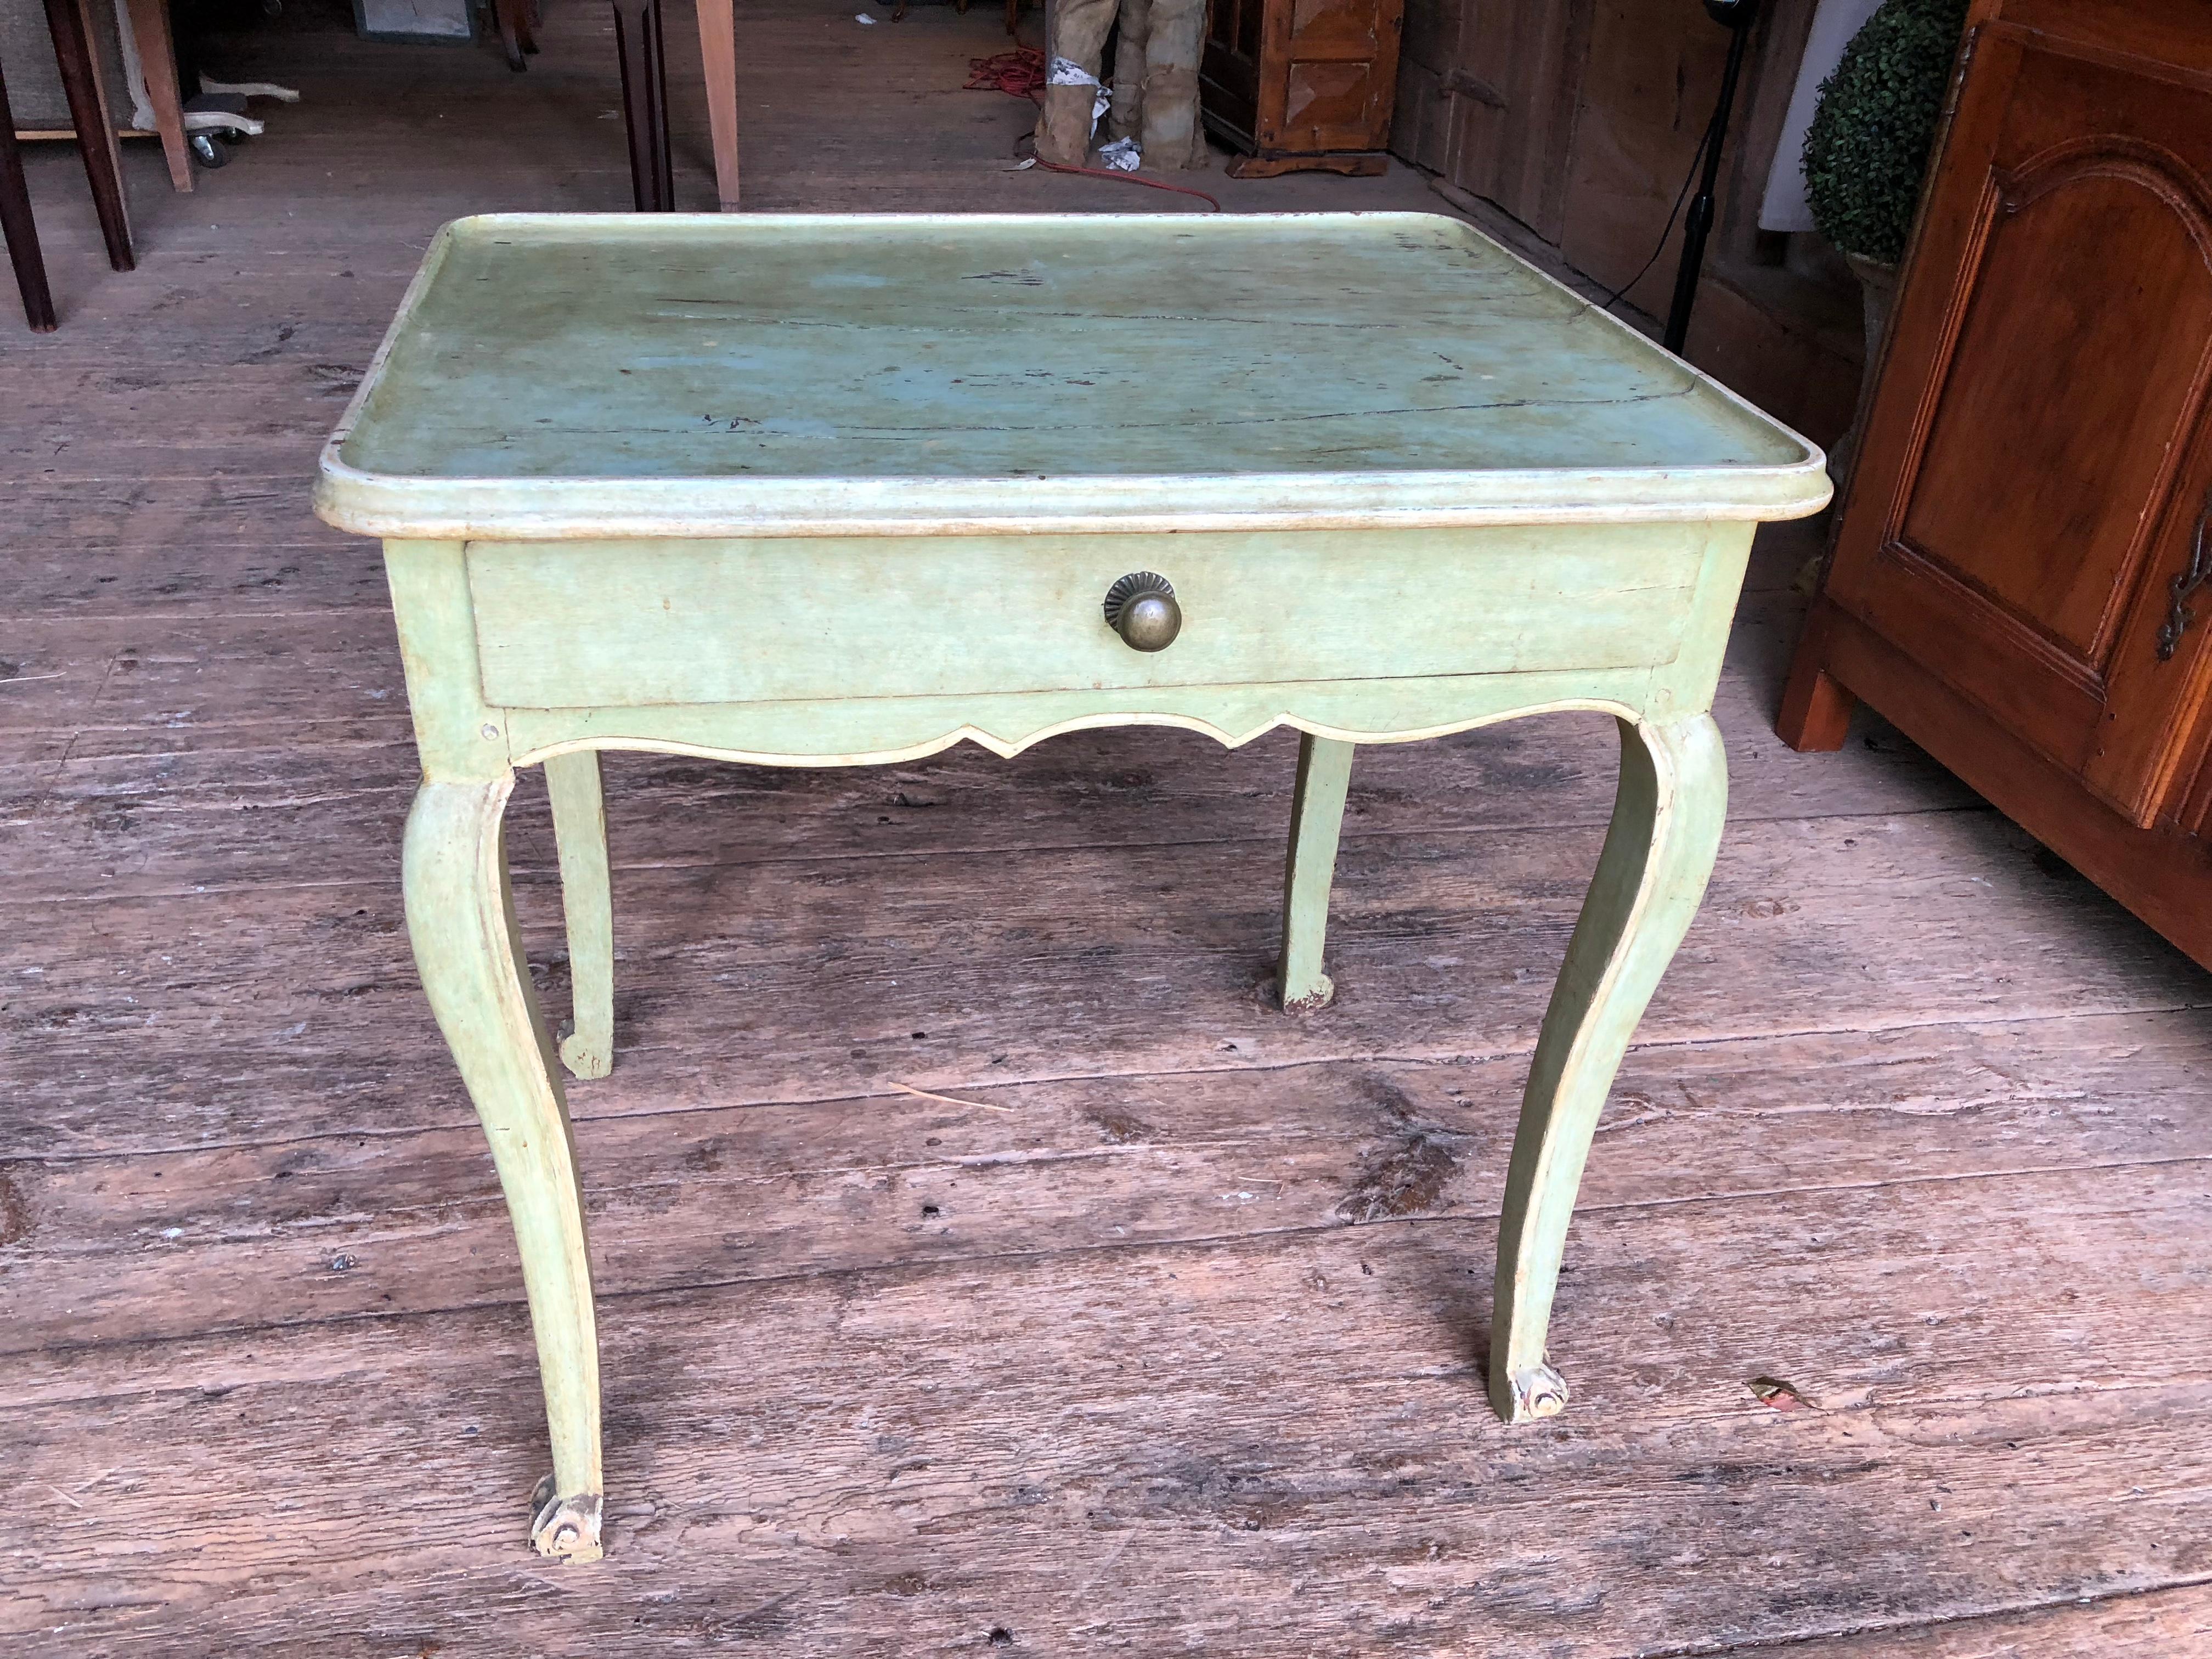 A charming Louis XV period painted side table in celedon green painted finish and cream details, French, circa 1770, with a single drawer, a dished-out top, scaloped apron and cabriole legs.